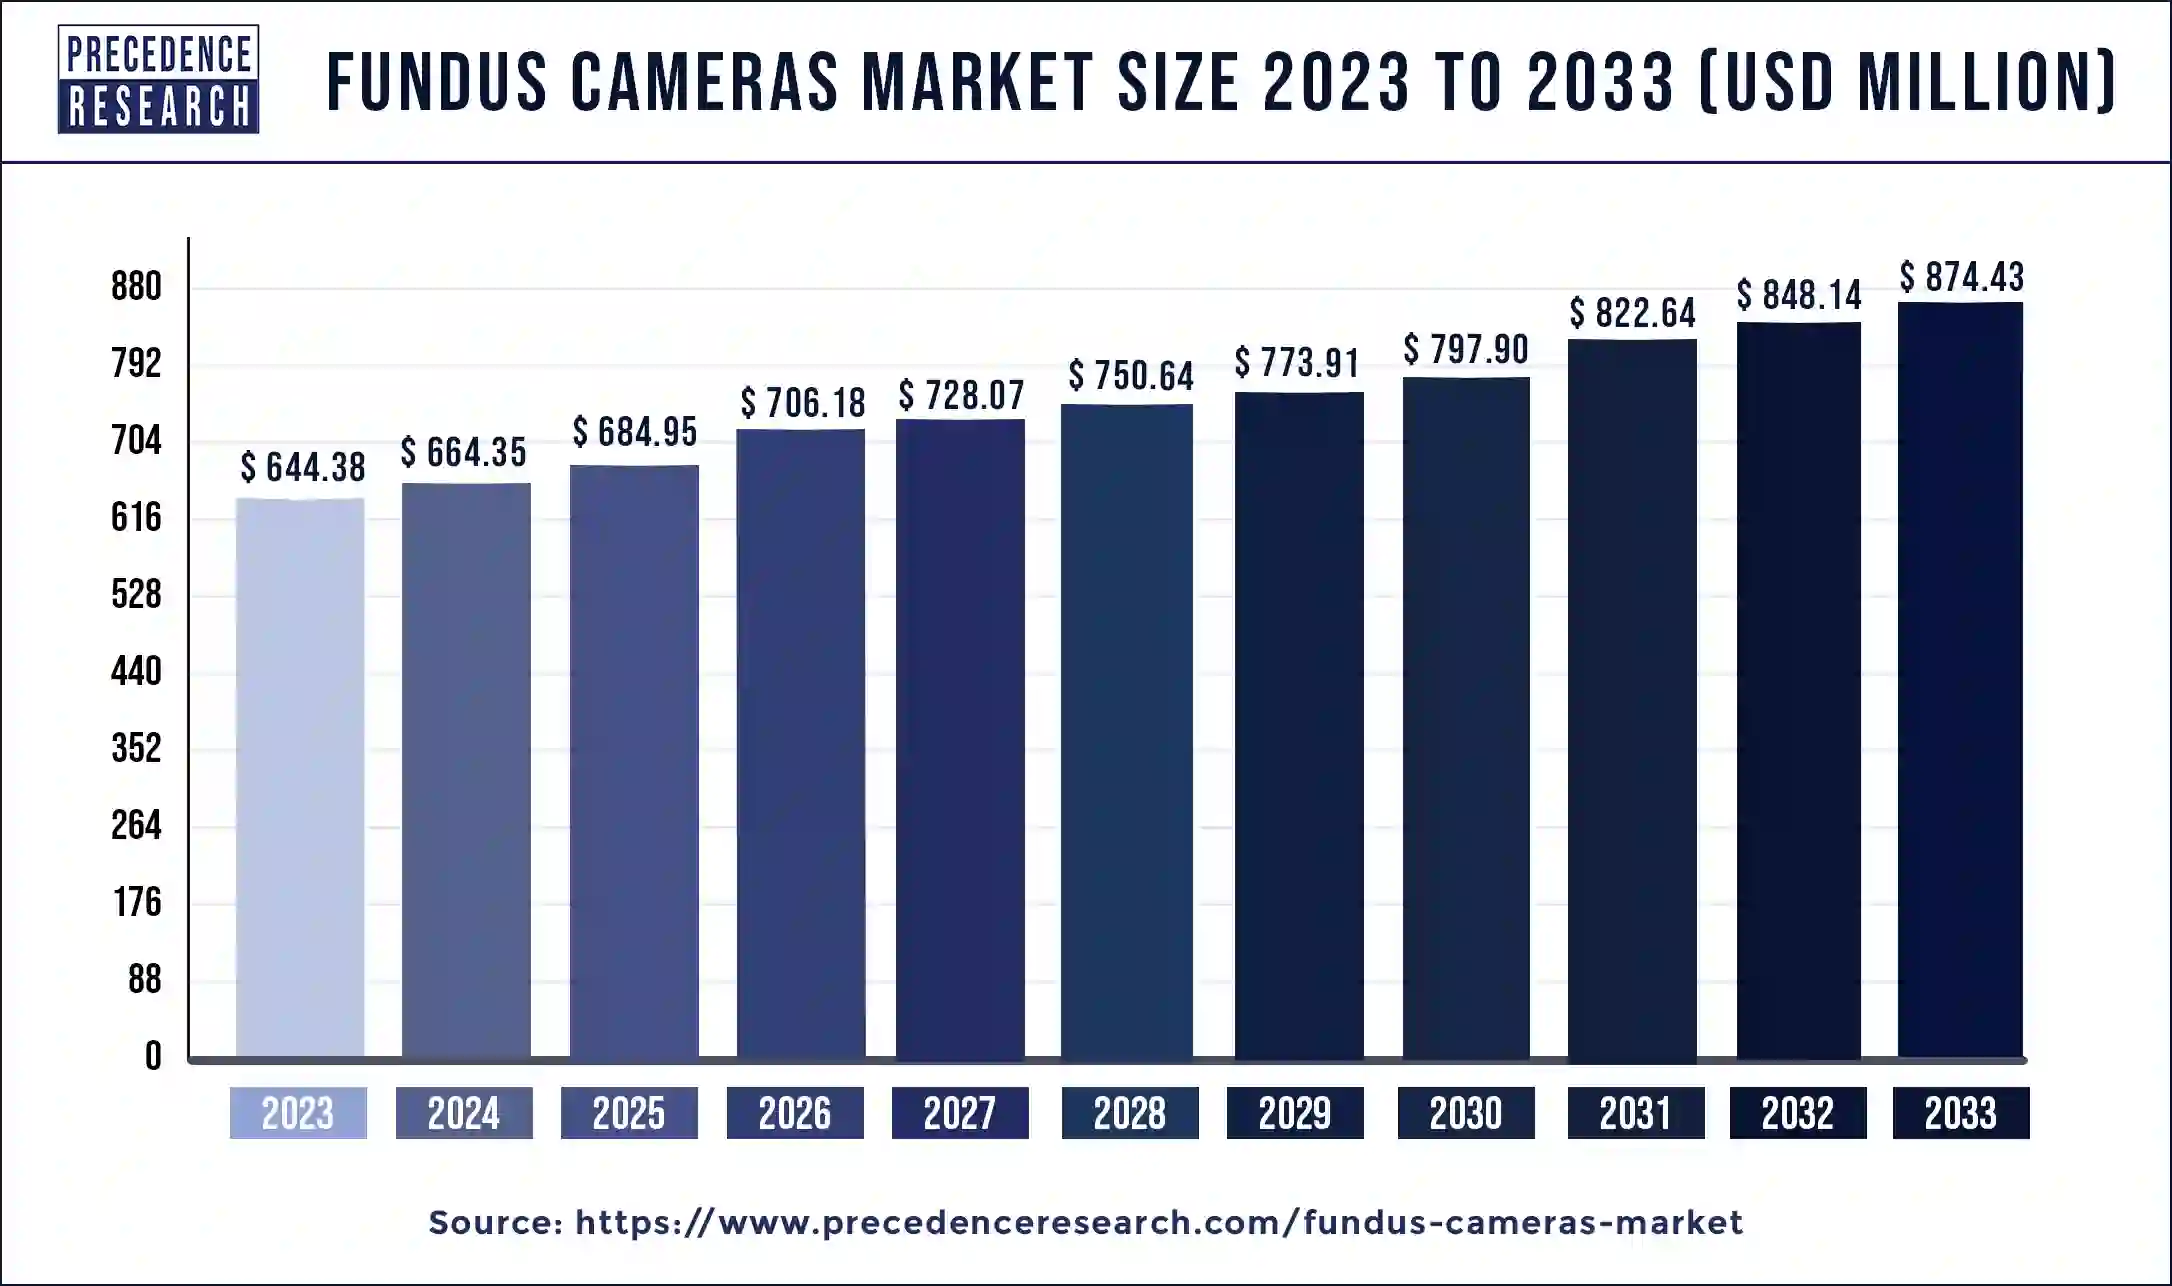 Fundus Cameras Market Size 2024 to 2033